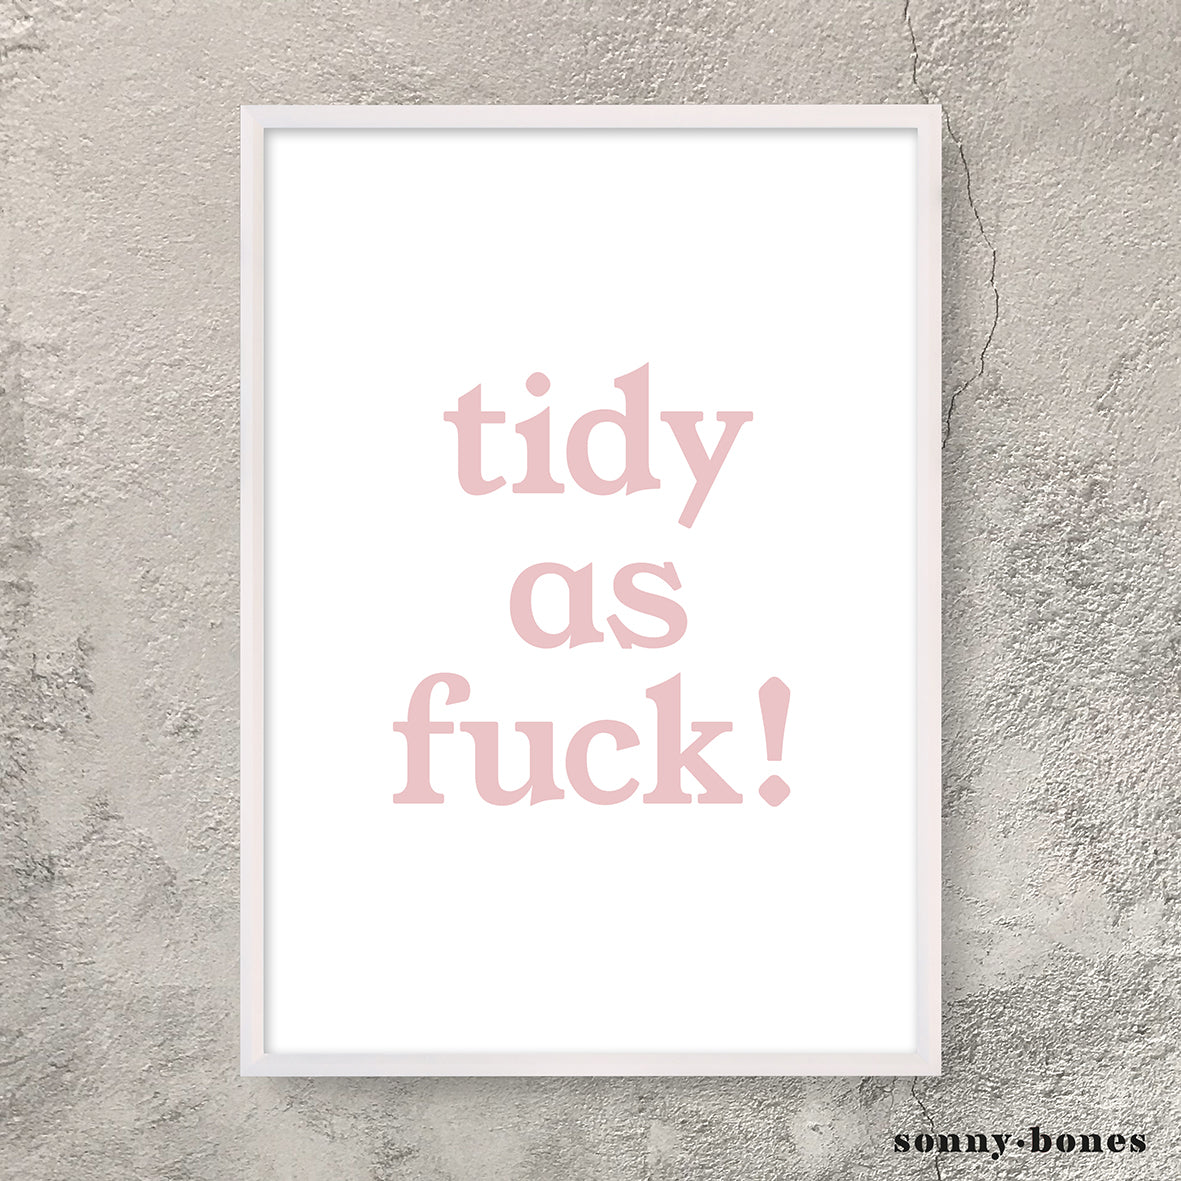 TIDY AS F**K! (pink/white)